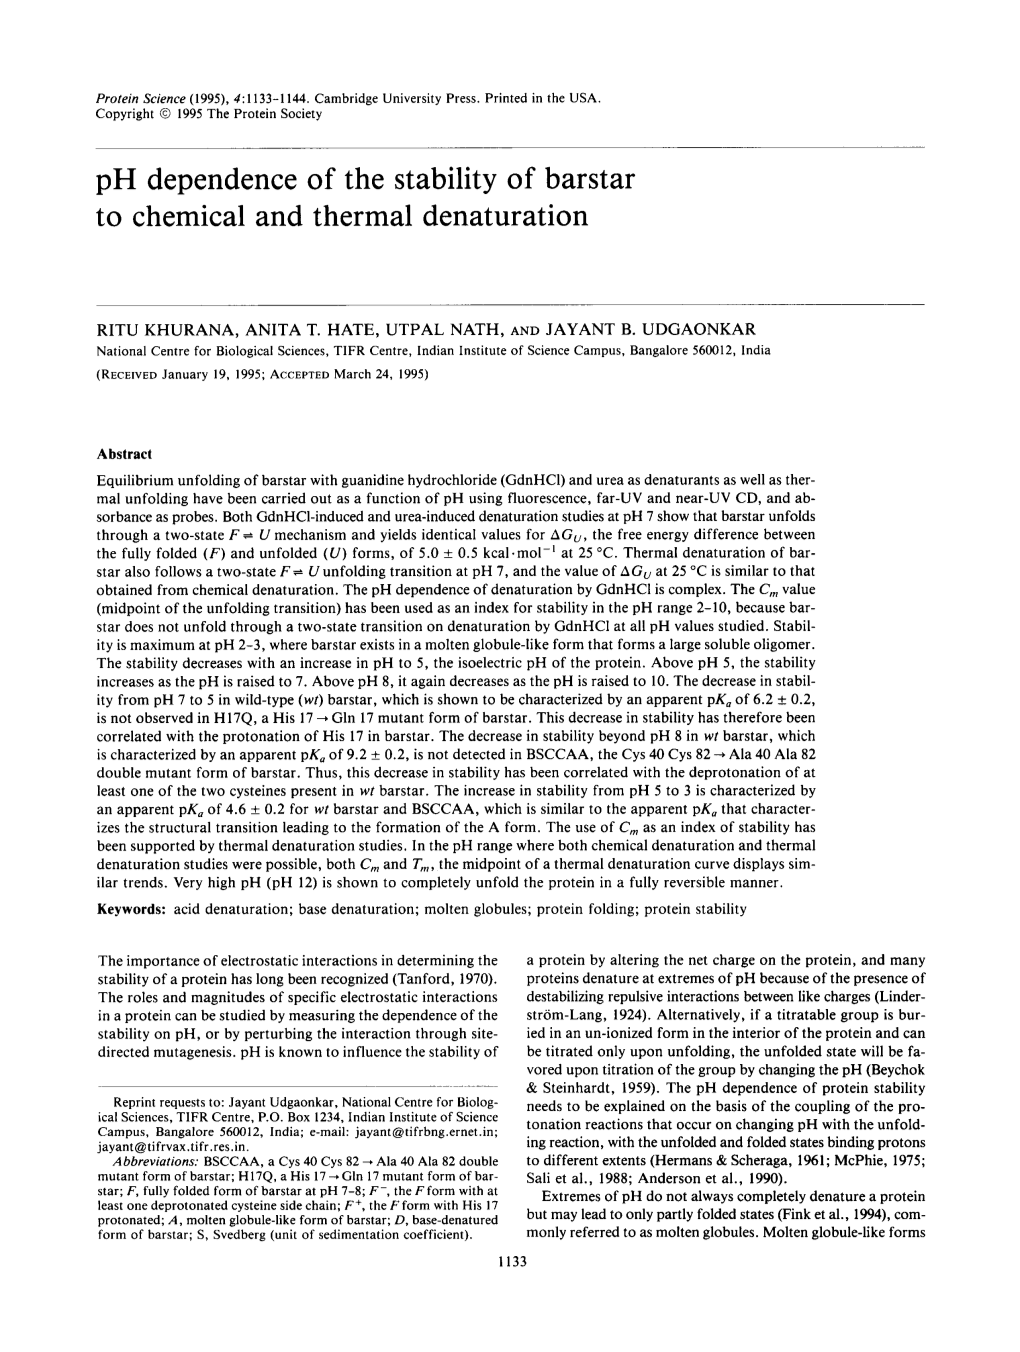 Ph Dependence of the Stability of Barstar to Chemical and Thermal Denaturation